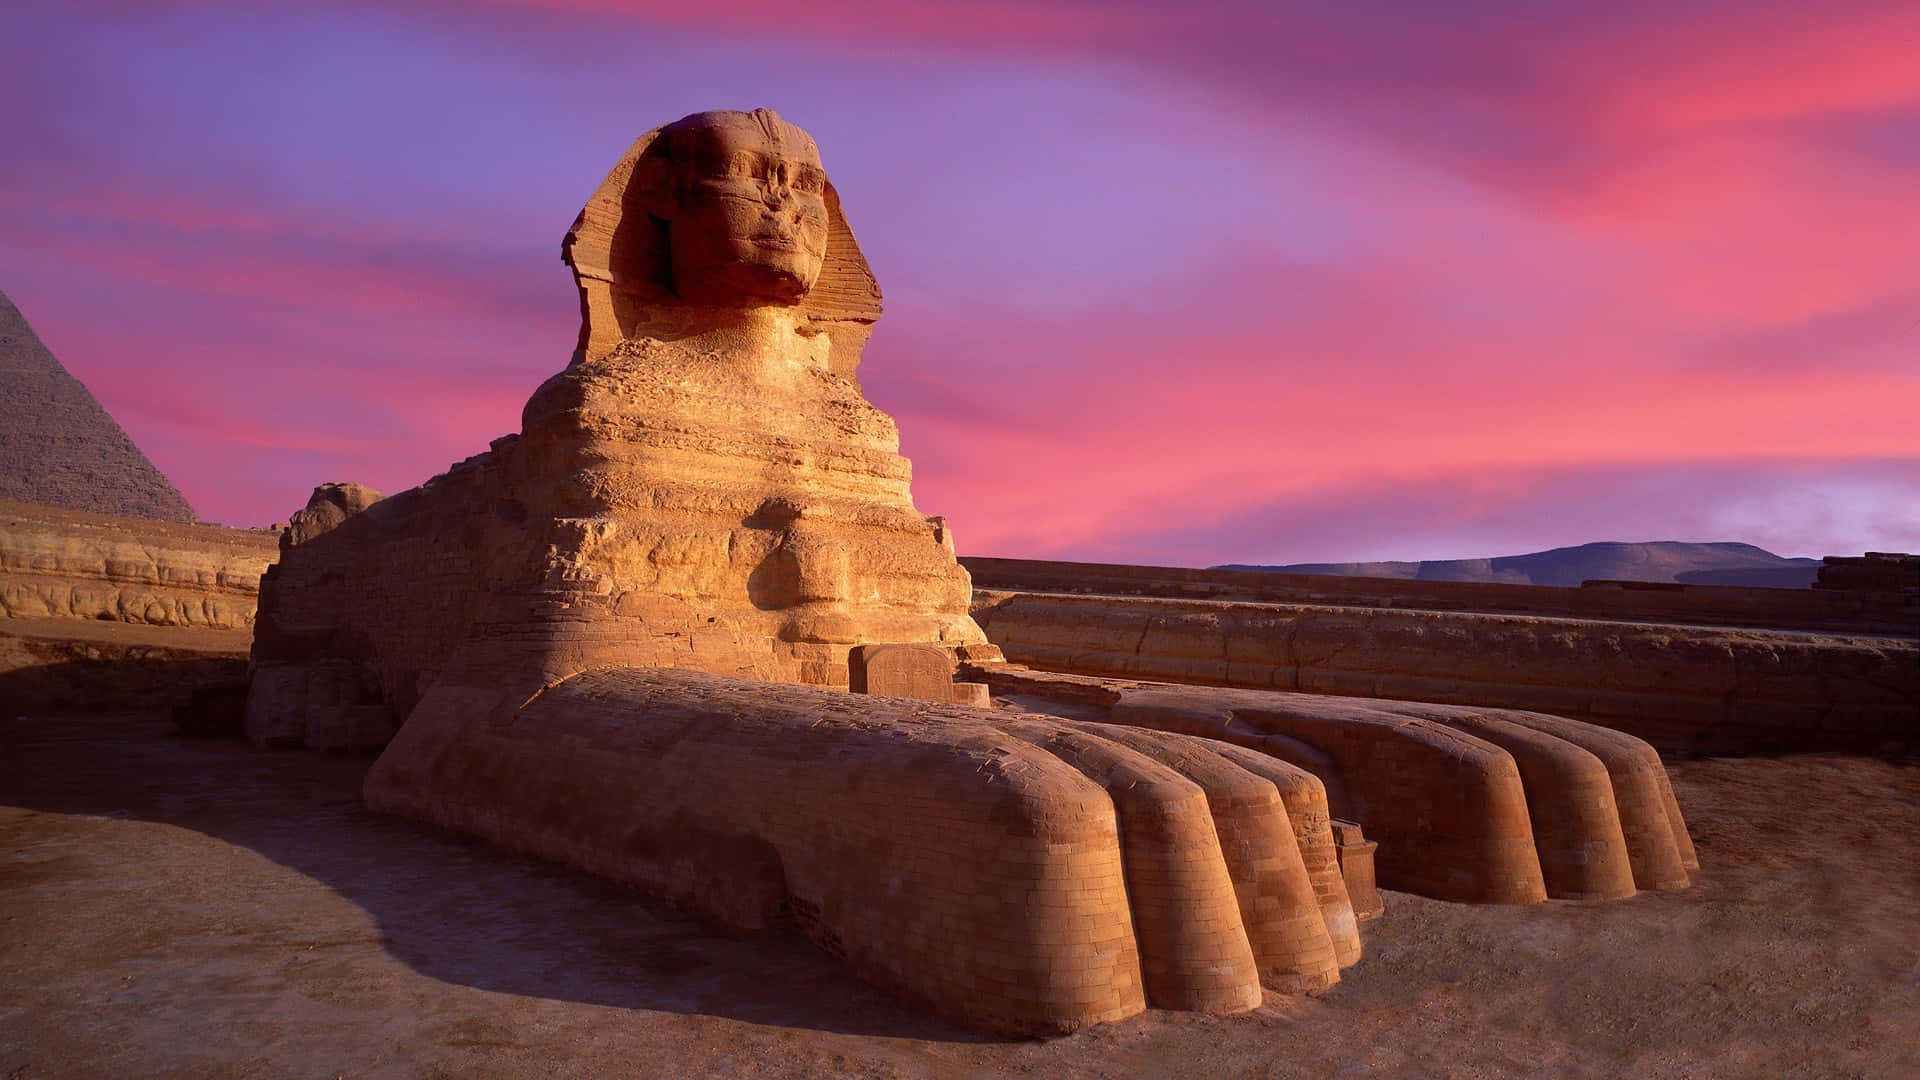 A Sphinx And Pyramids At Sunset Background